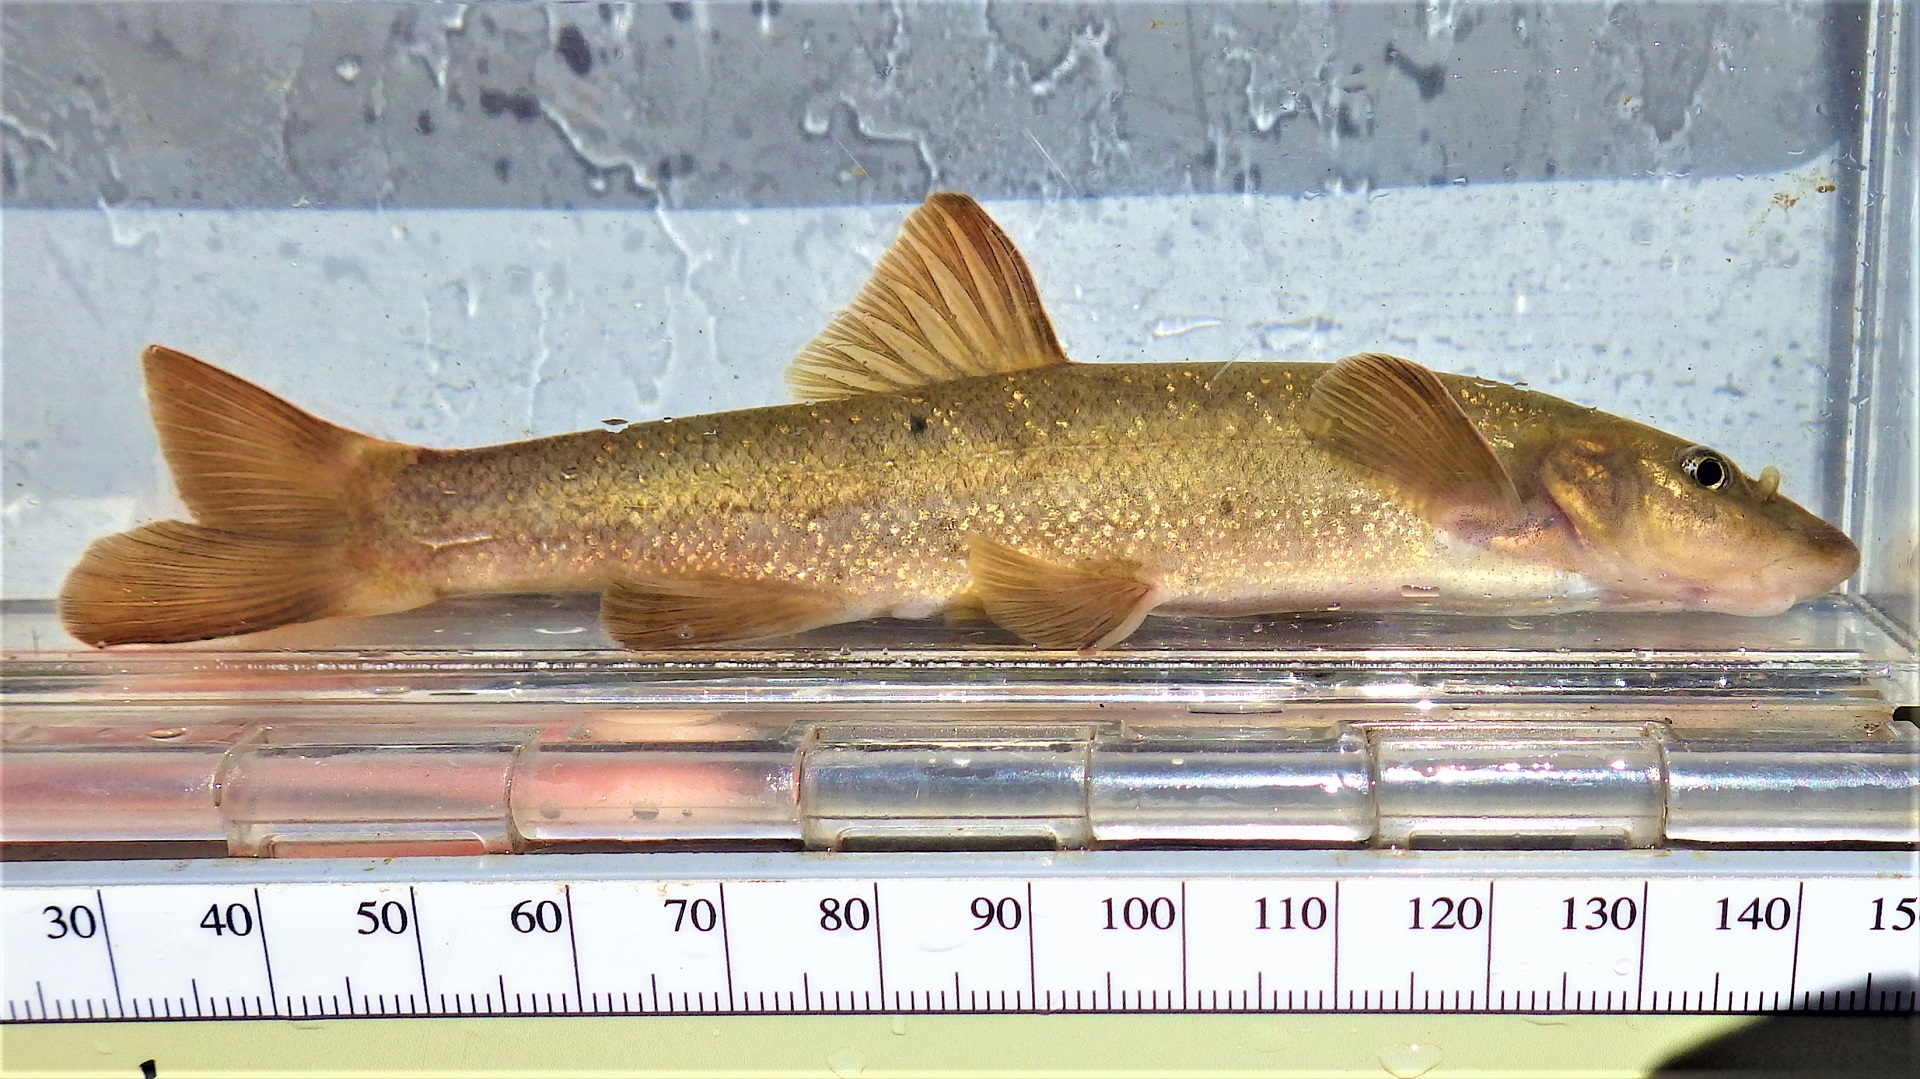 A yellow fish being measured in a clear container